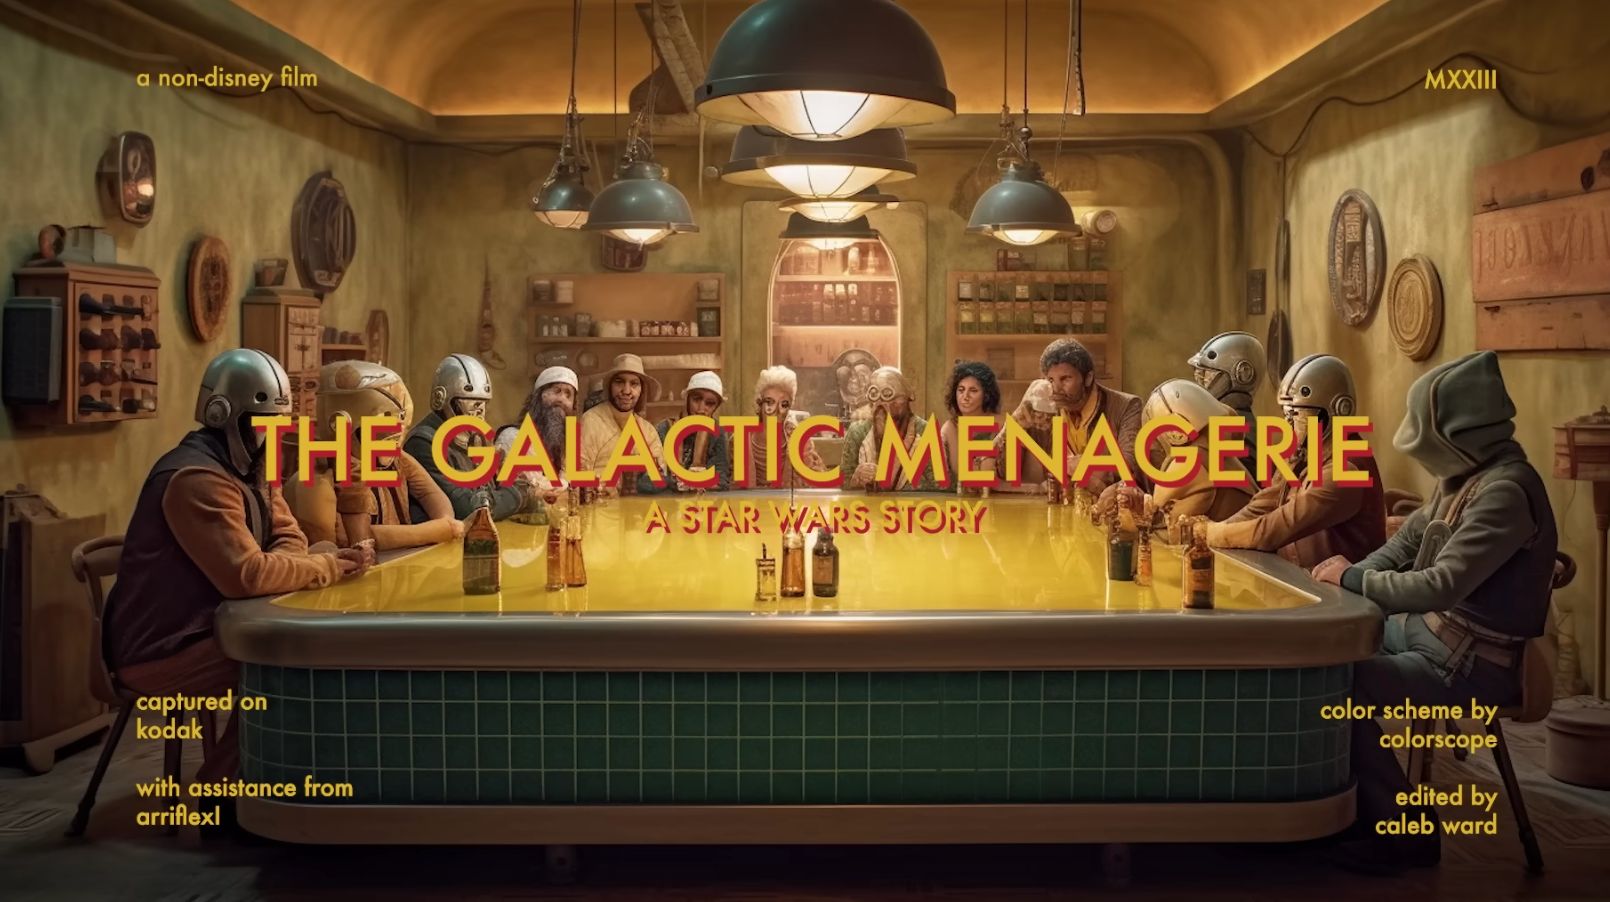 The ‘Wes Anderson Directs Star Wars’ AI Trend Gets An Impressive Full-Length Trailer